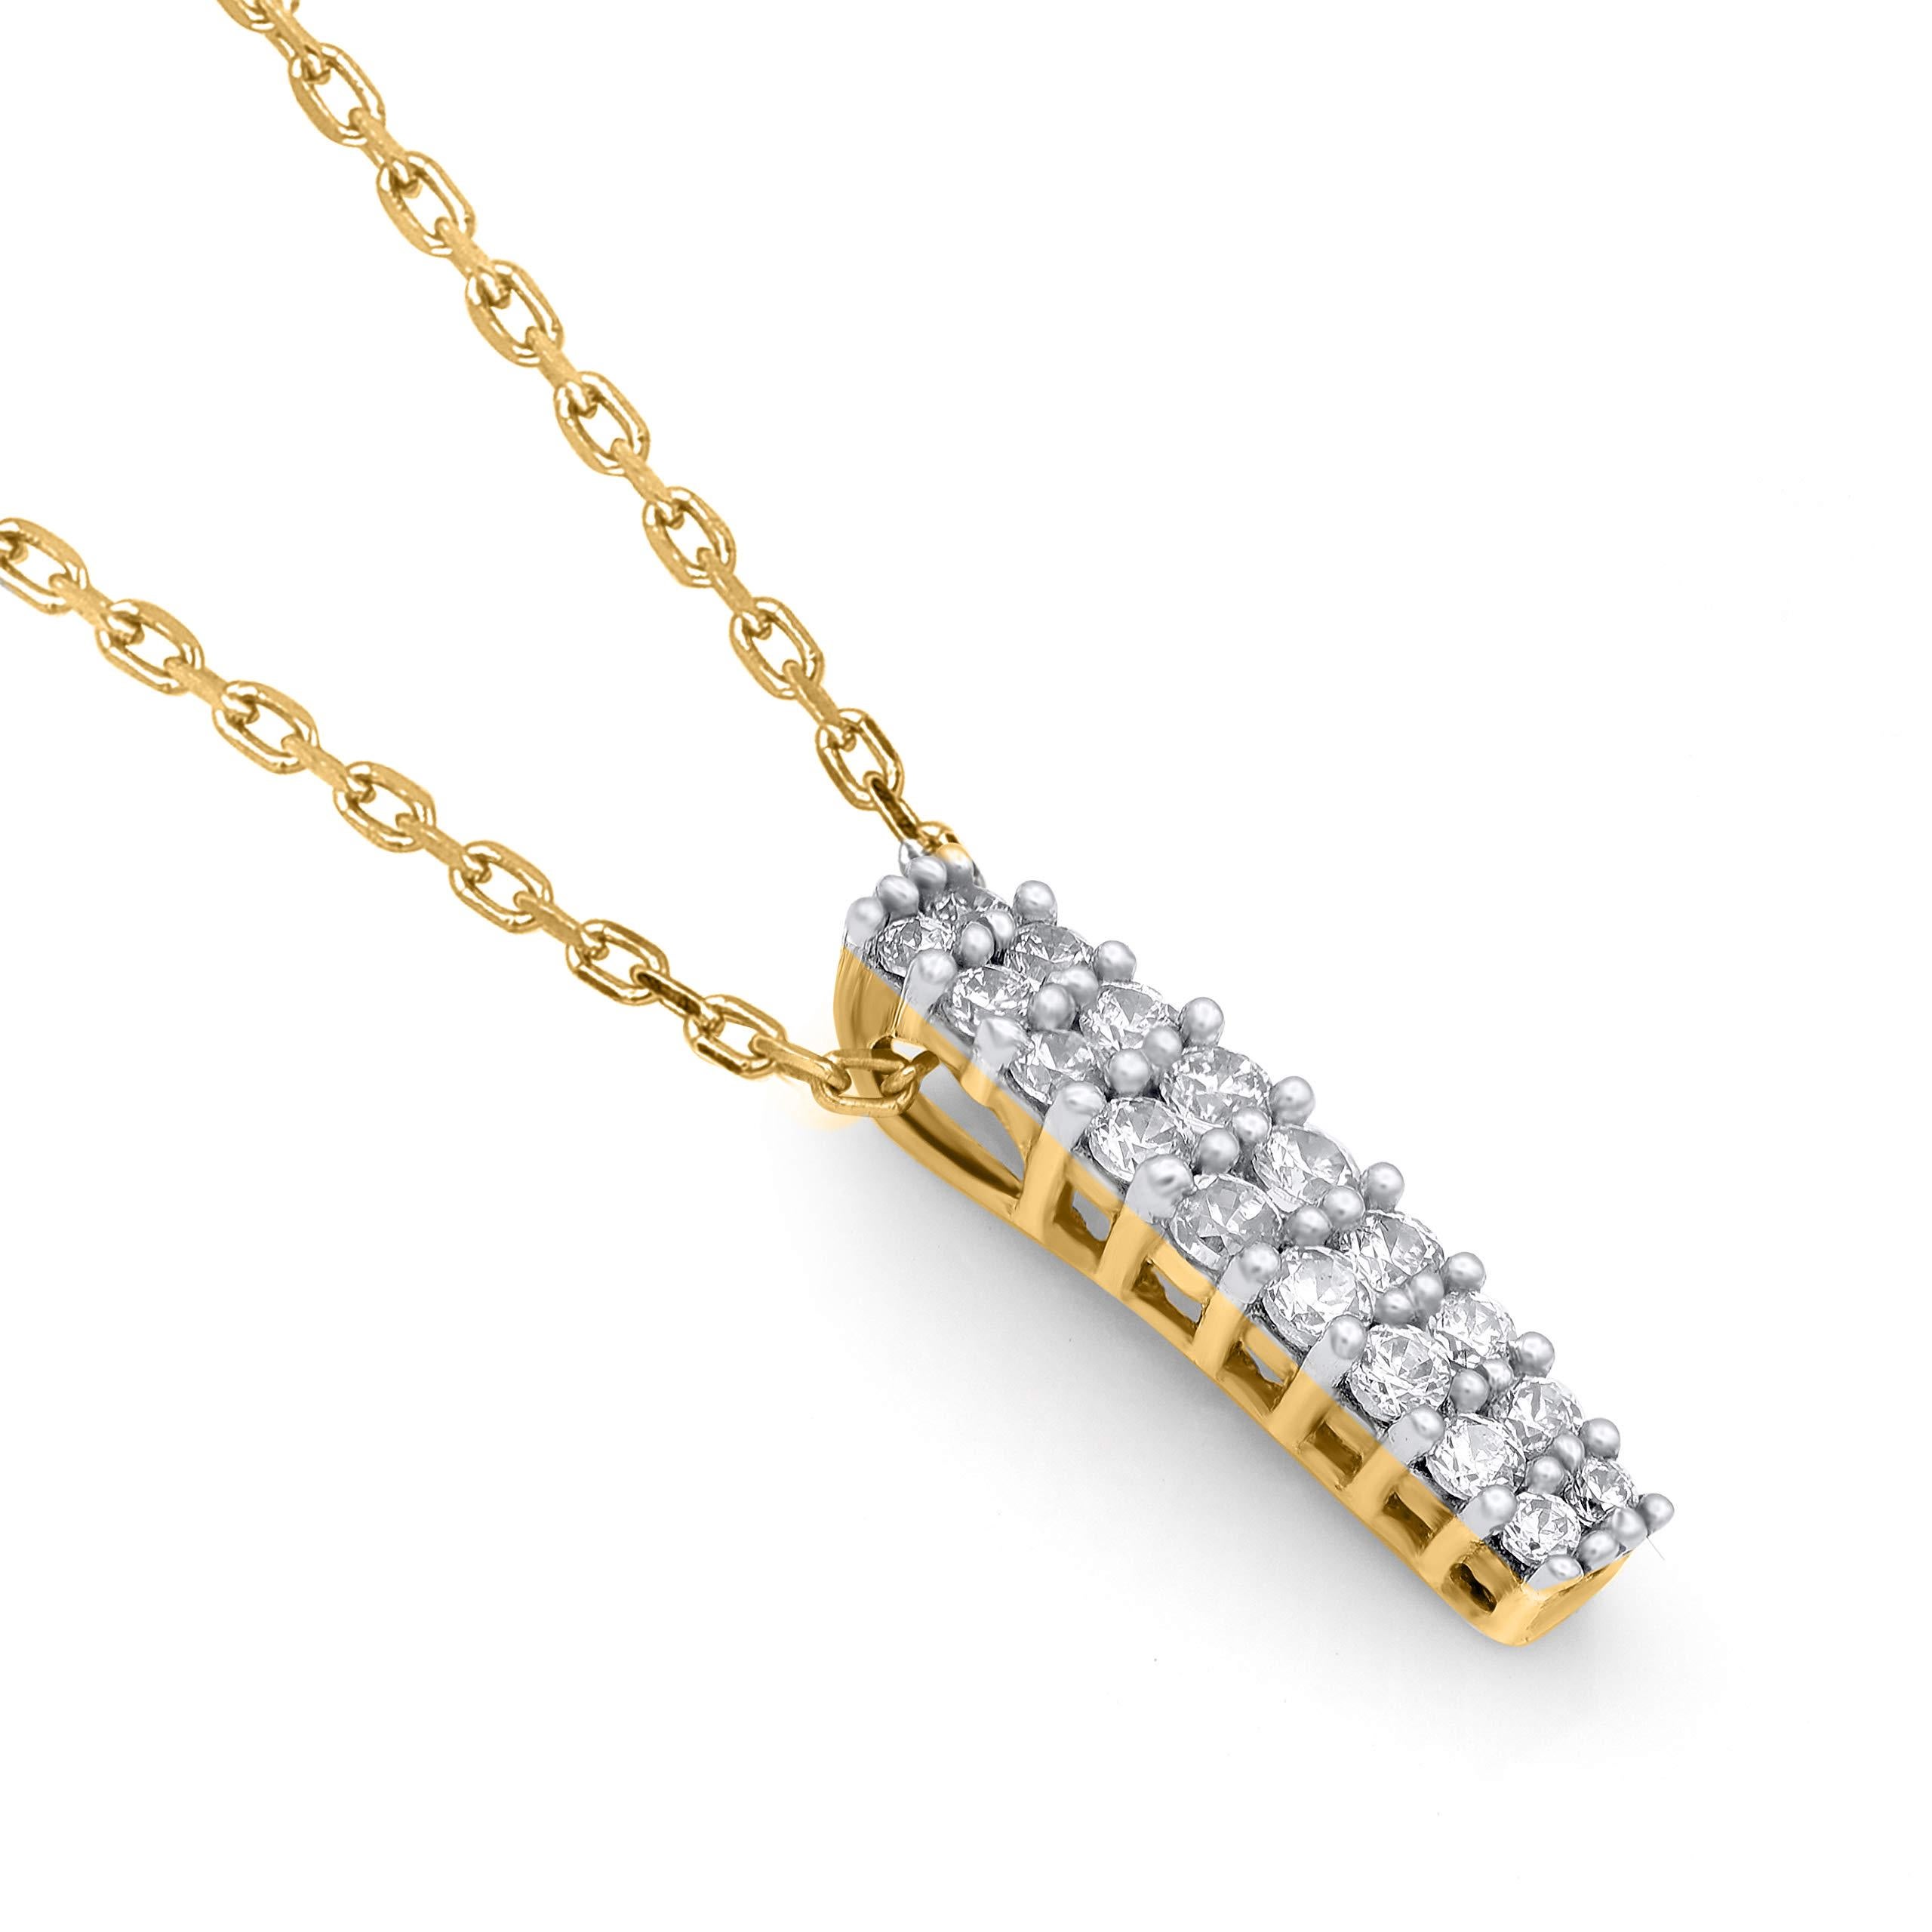 Make a bold statement of style and beliefs with the eye-catching elegance of this diamond line pendant. Beautifully crafted by our inhouse experts in 14 karat yellow gold and embellished with 18  round brilliant cut diamond set in prong setting. The